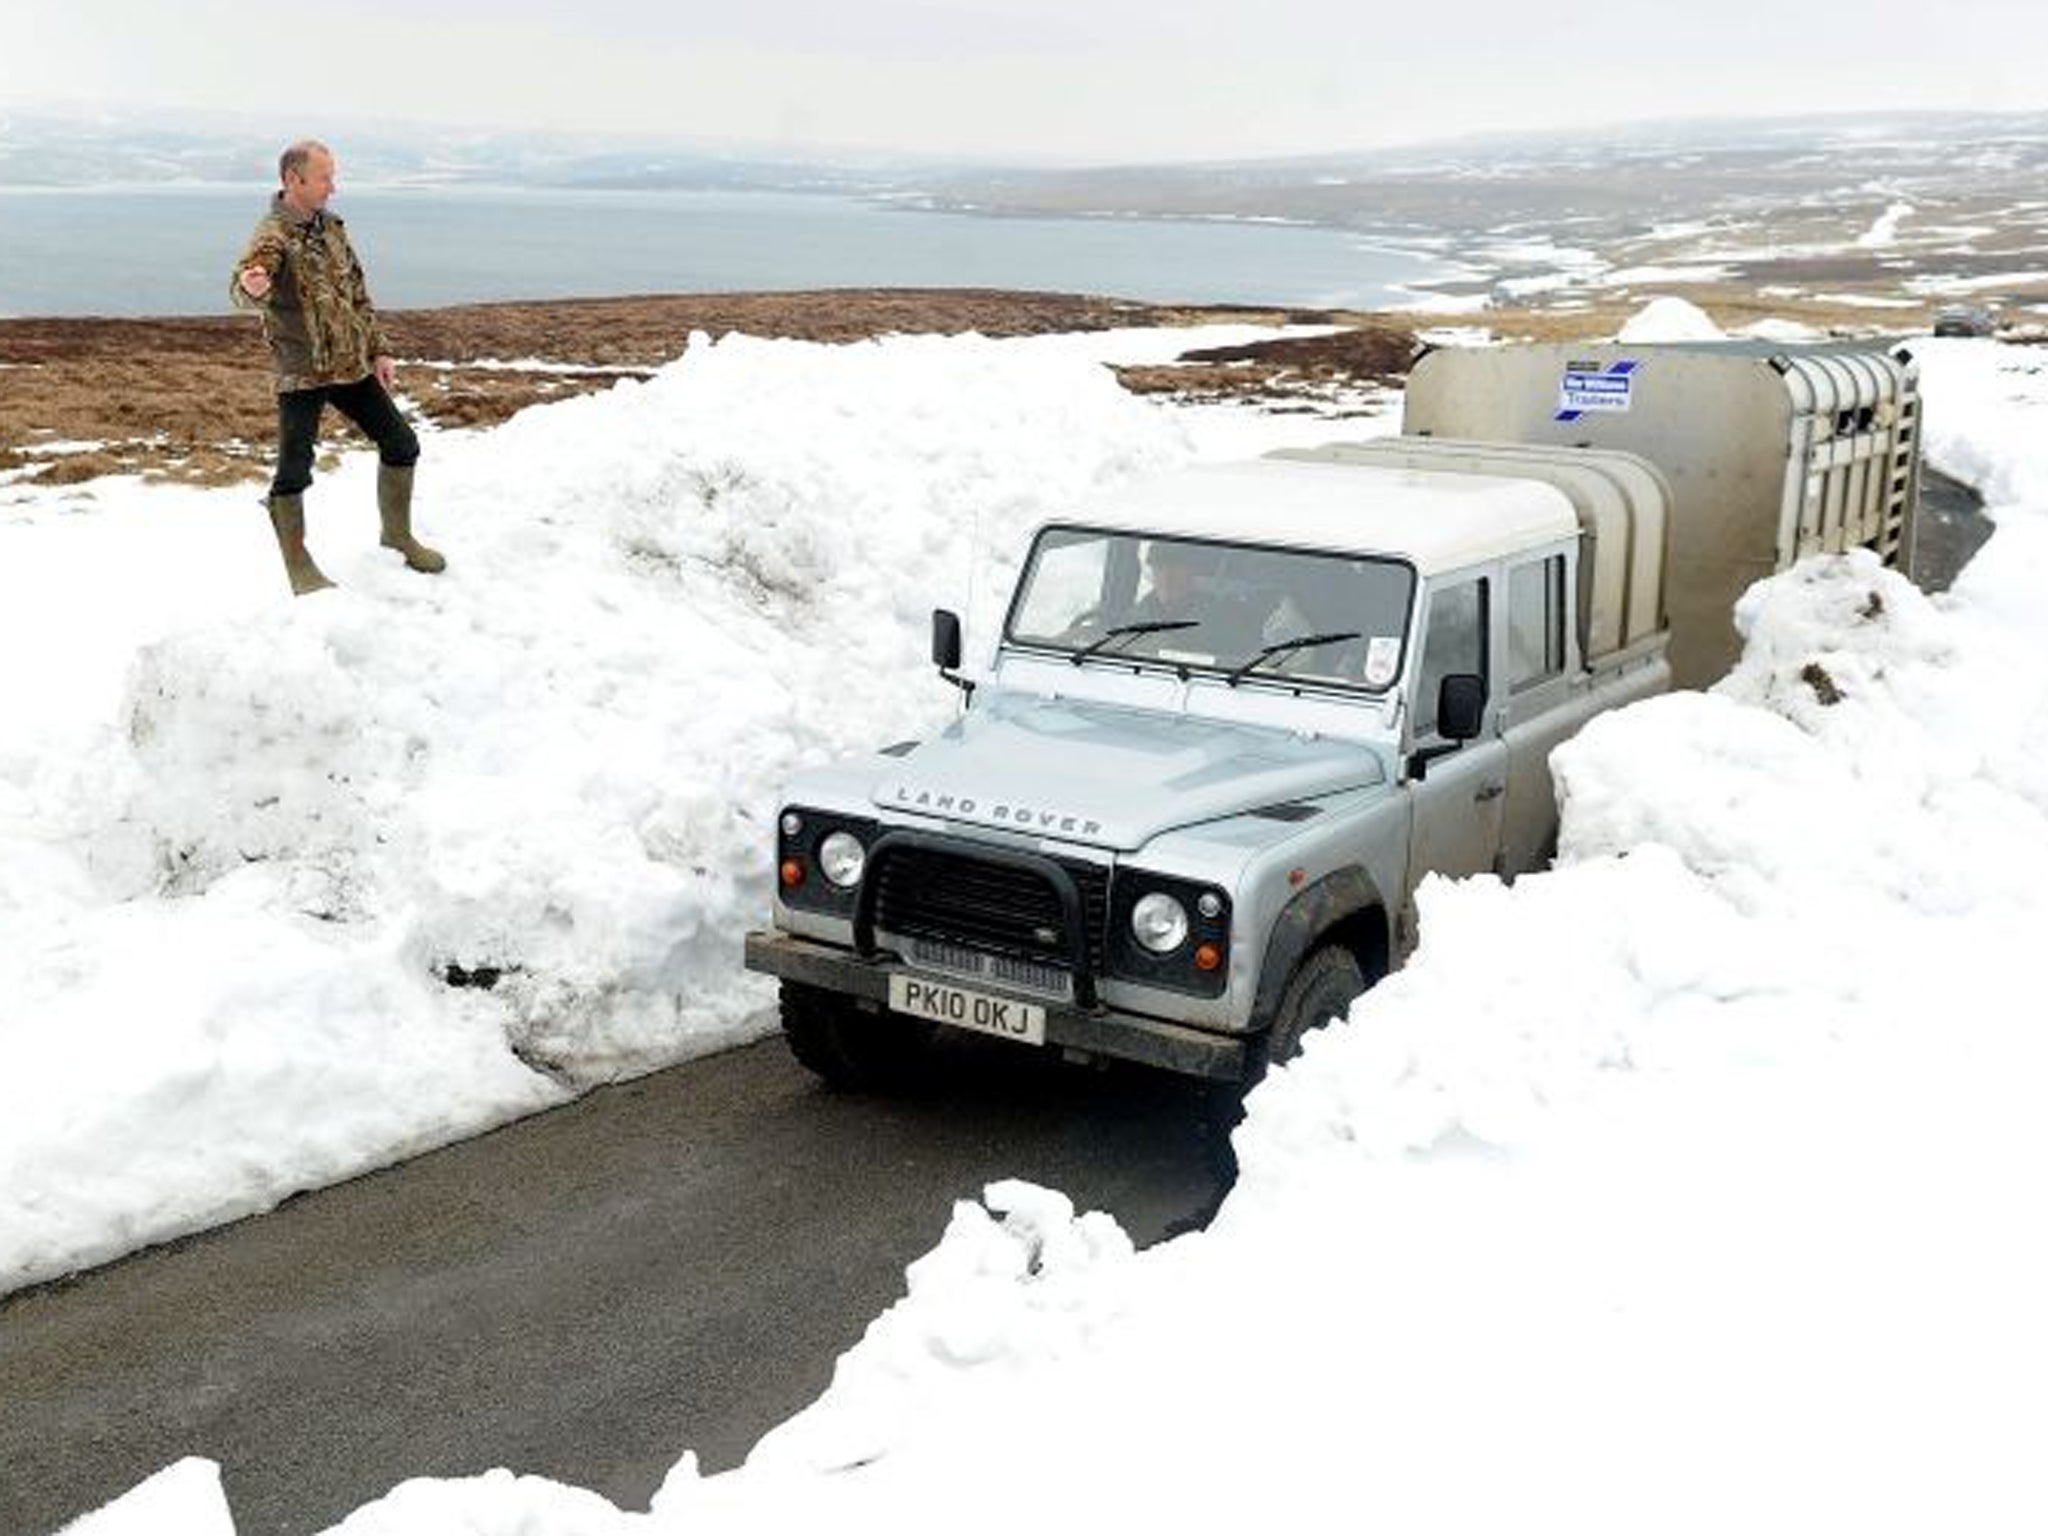 A car travels through the snow near Allenheads in Northumberland in April